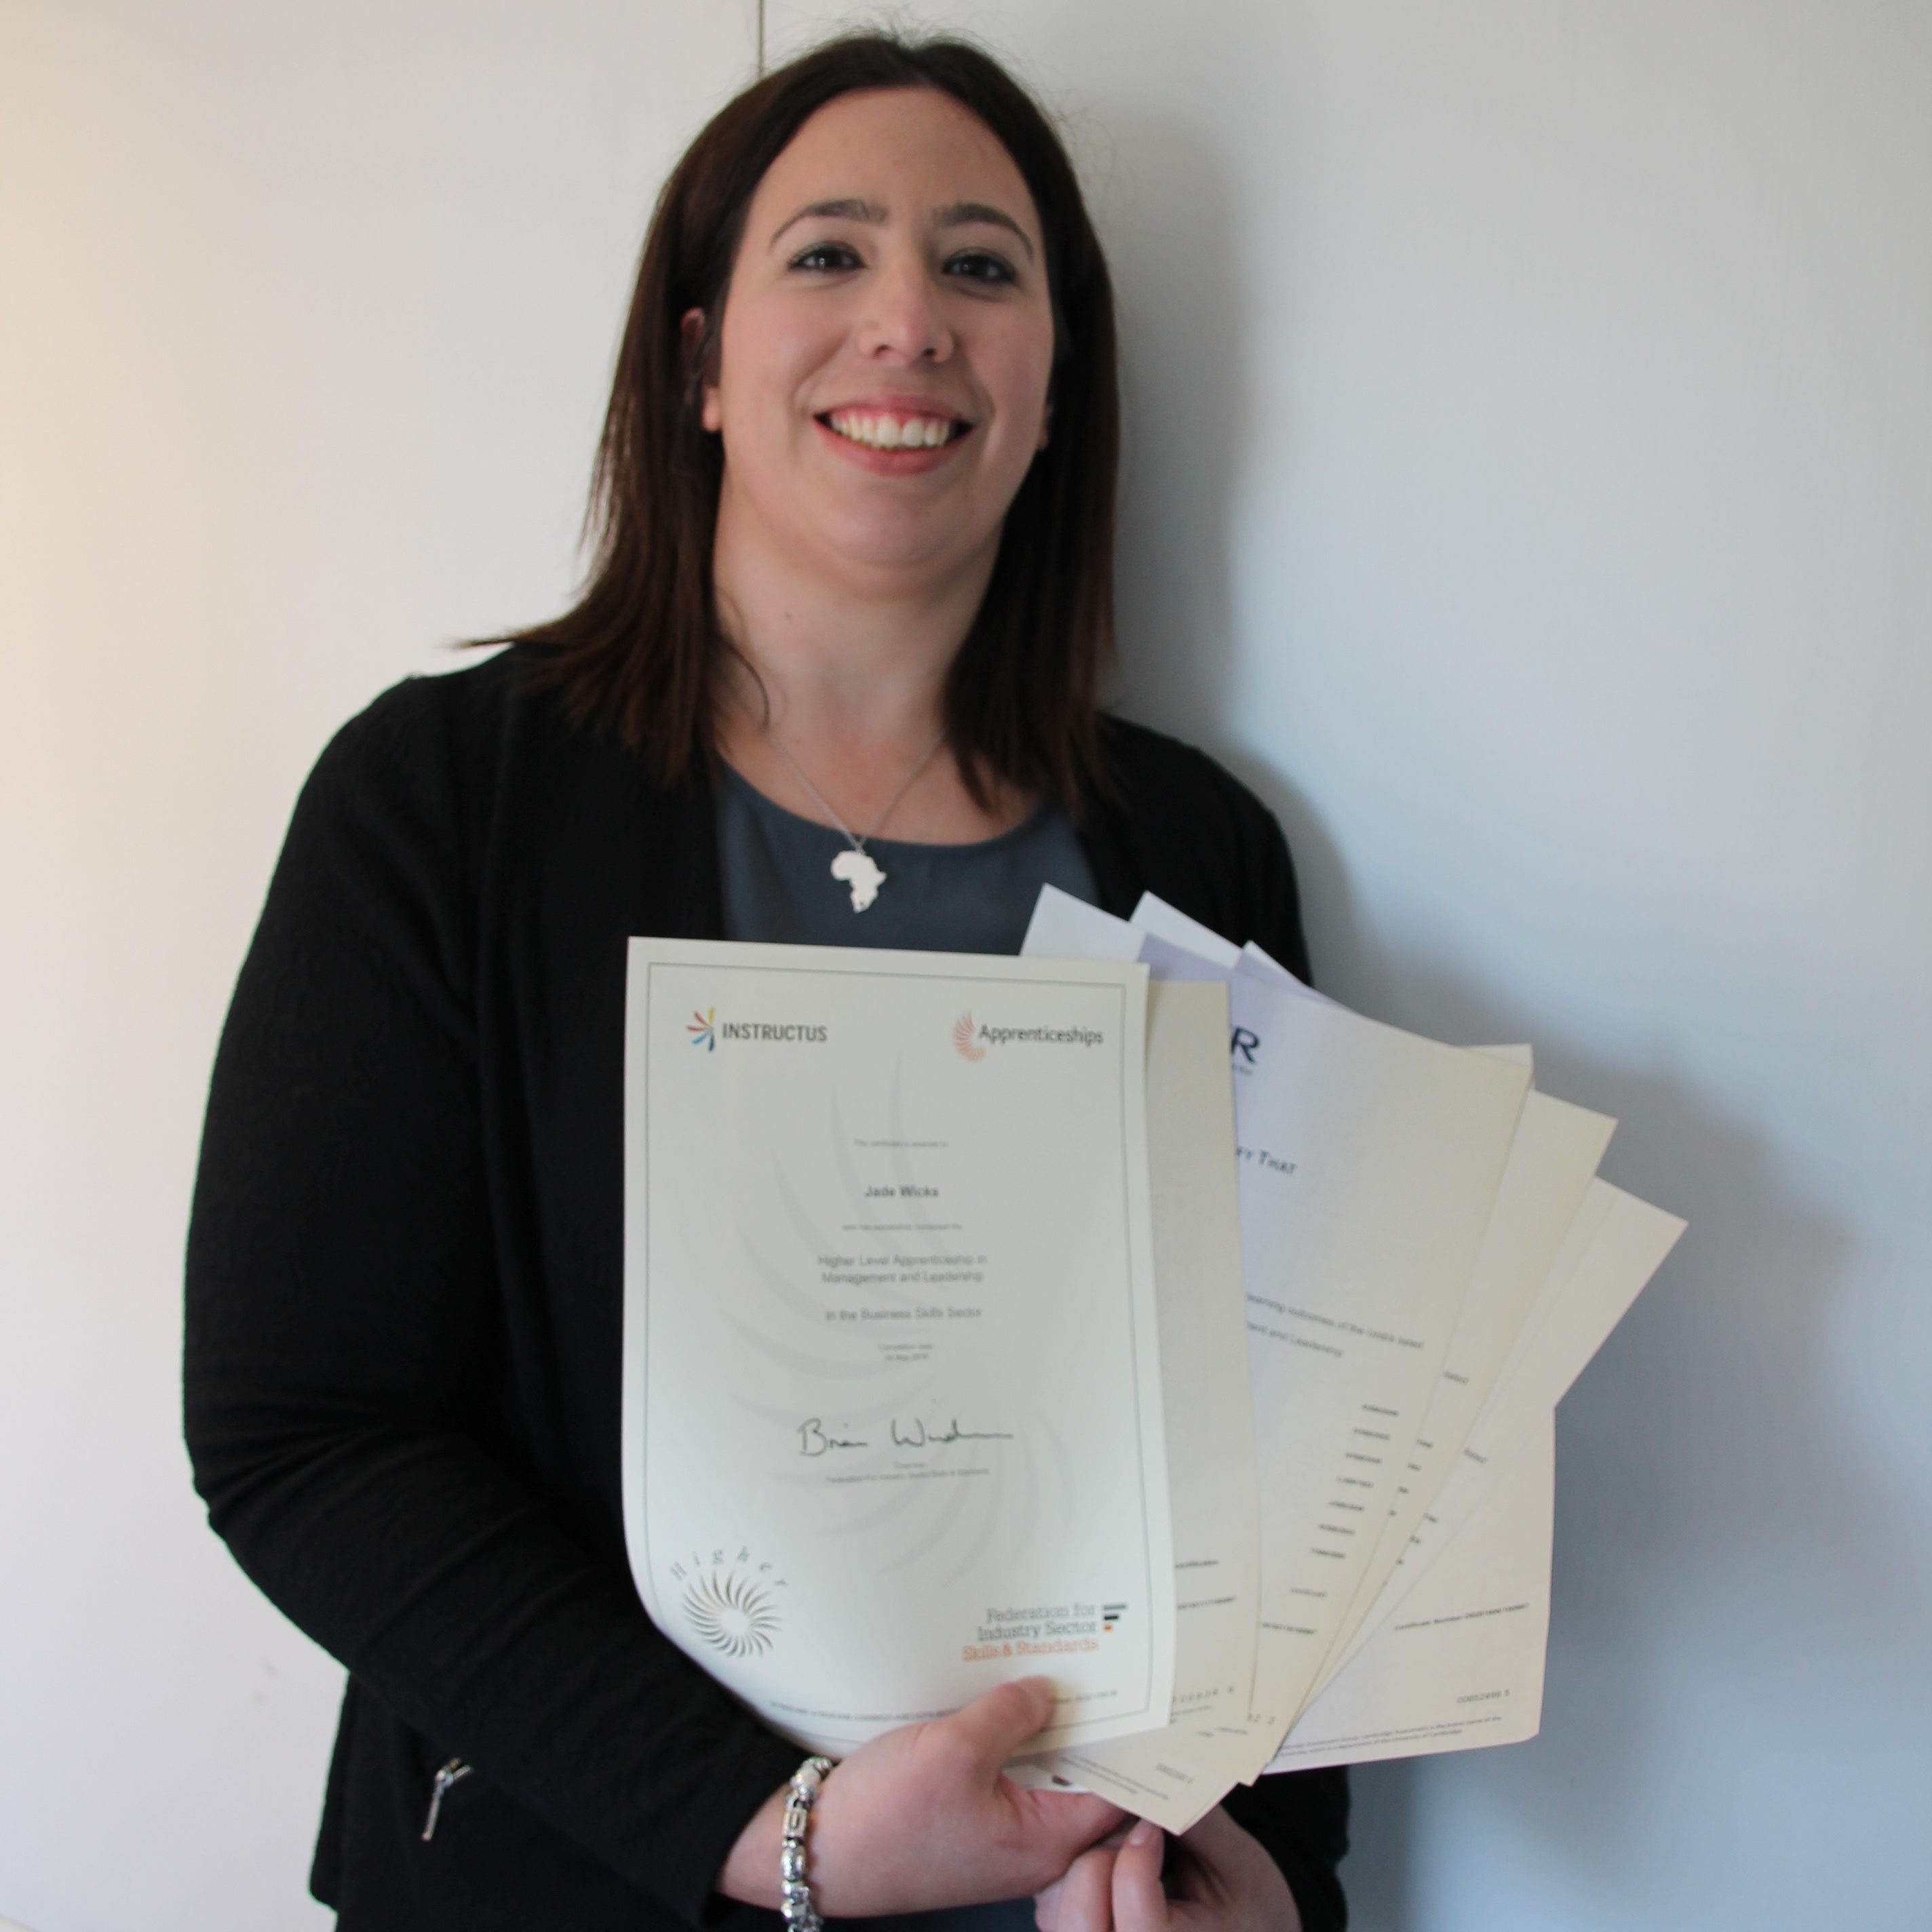 Lady with long dark hair holding certificates